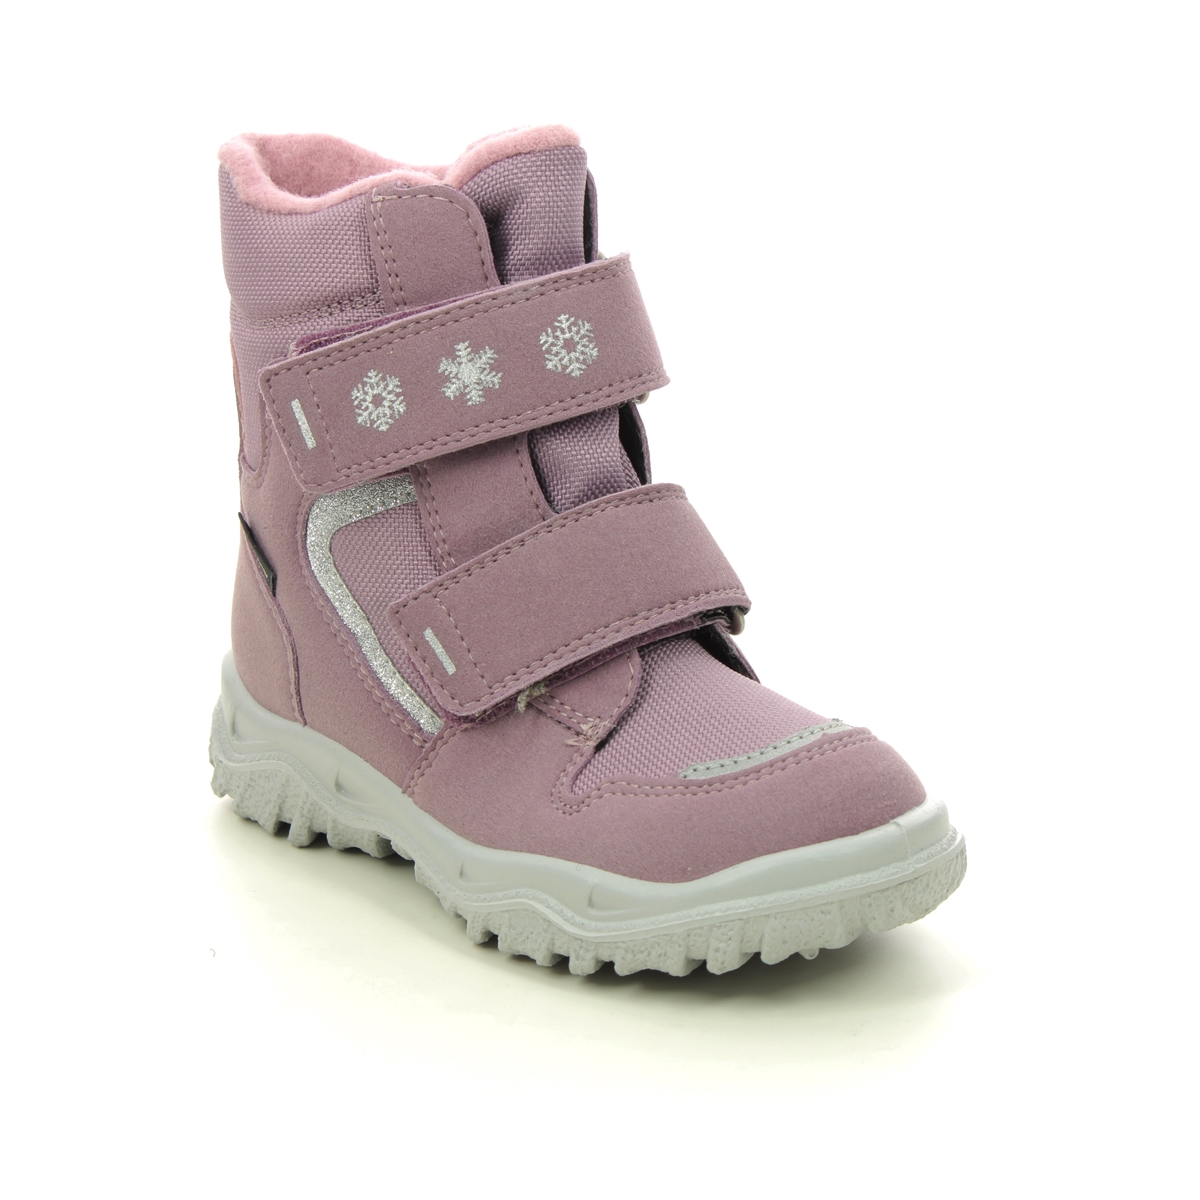 Superfit Husky  Inf Gtx Pink Leather Kids Toddler Girls Boots 1000045-8510 In Size 23 In Plain Pink Leather For kids